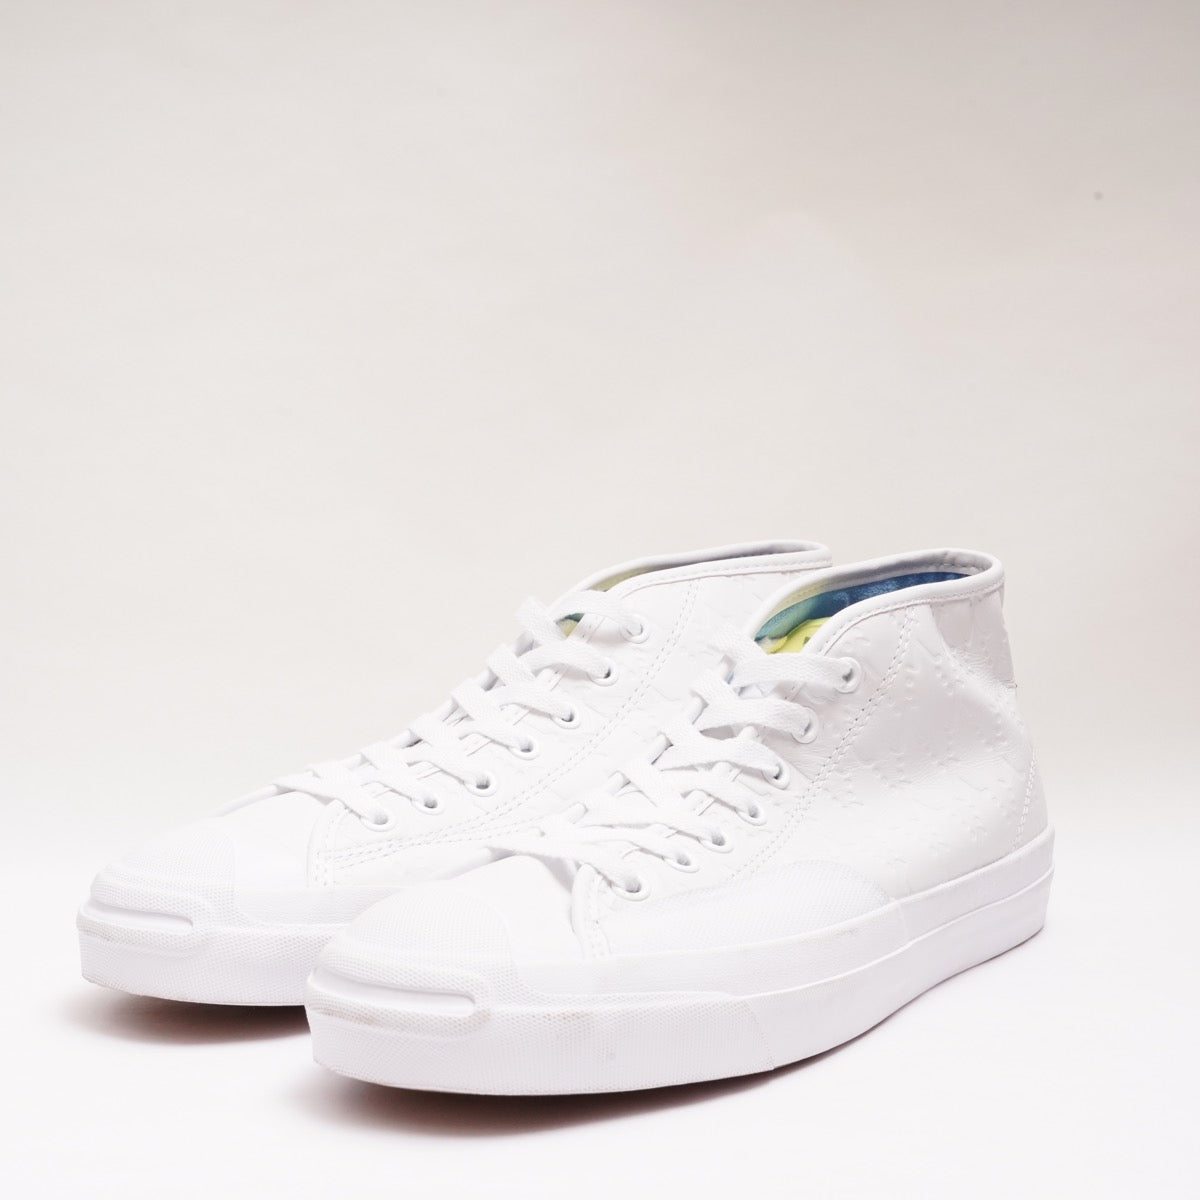 CONVERSE CONS JACK PURCELL PRO MID ALEXIS SABLONE